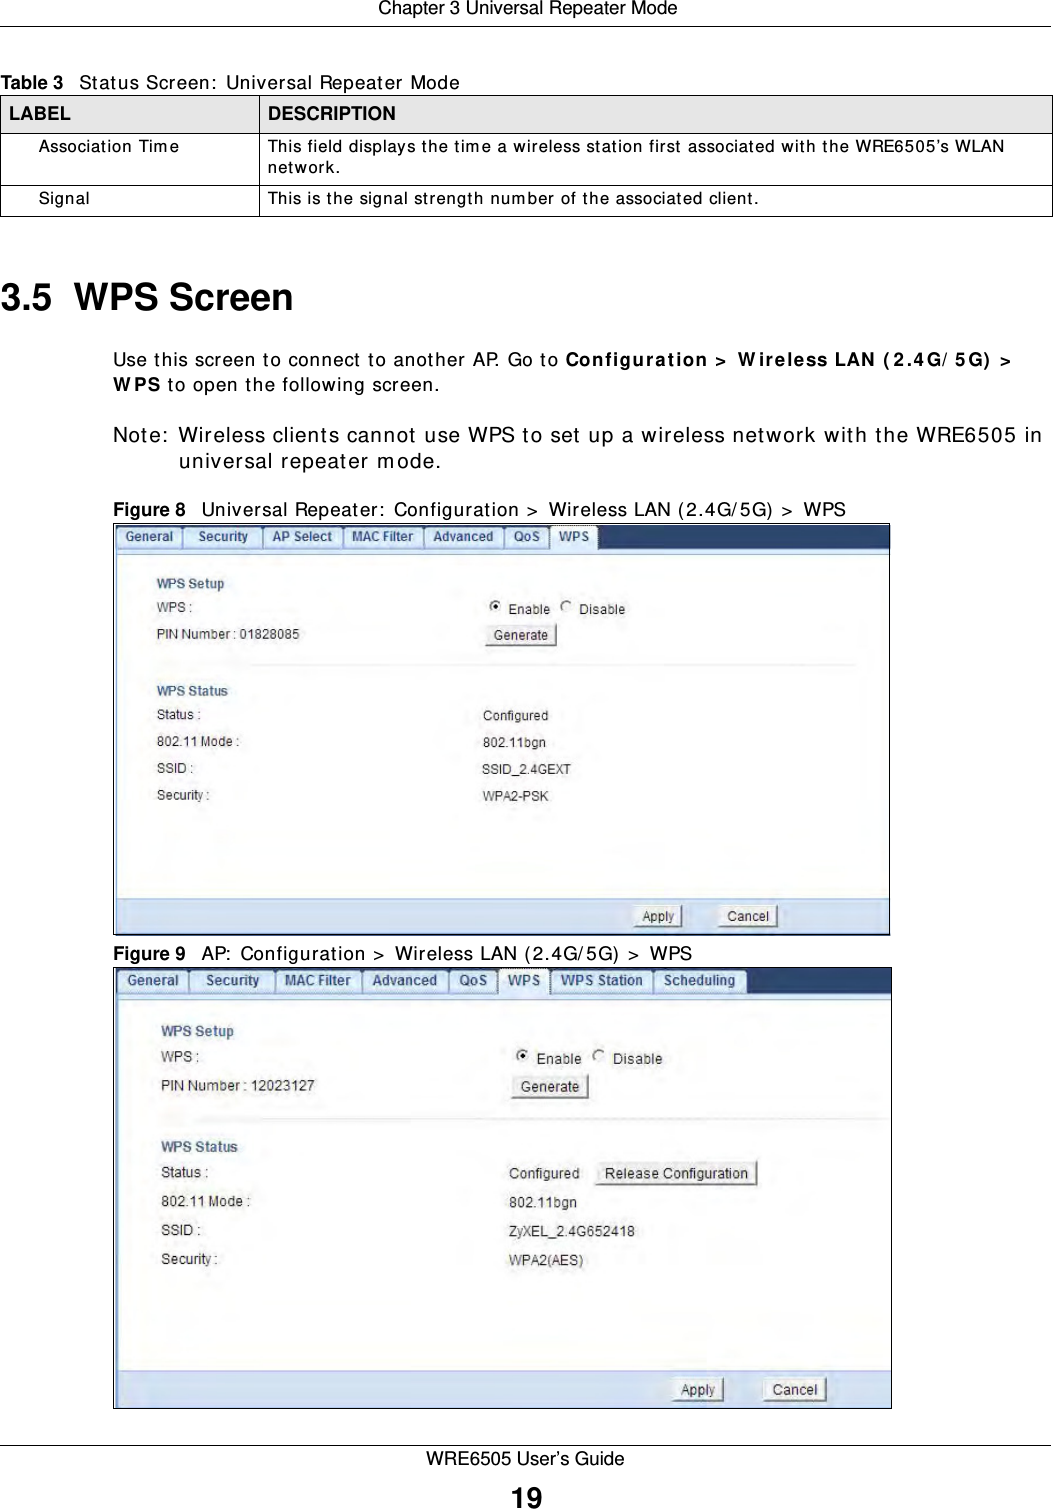  Chapter 3 Universal Repeater ModeWRE6505 User’s Guide193.5  WPS ScreenUse this screen to connect to another AP. Go to Configu ra t ion  &gt;  W ir eless LAN ( 2 .4 G/ 5 G)  &gt;  W PS to open the following screen.Note:  Wireless clients cannot use WPS to set up a wireless network with the WRE6505 in universal repeater m ode. Figure 8   Universal Repeater:  Configuration &gt;  Wireless LAN (2.4G/ 5G) &gt;  WPS Figure 9   AP:  Configuration &gt;  Wireless LAN (2.4G/ 5G)  &gt;  WPS Association Tim e This field displays the time a wireless station first associated with the WRE6505’s WLAN network.Signal This is the signal strengt h num ber of the associated client.Table 3   Status Screen:  Universal Repeater Mode LABEL DESCRIPTION